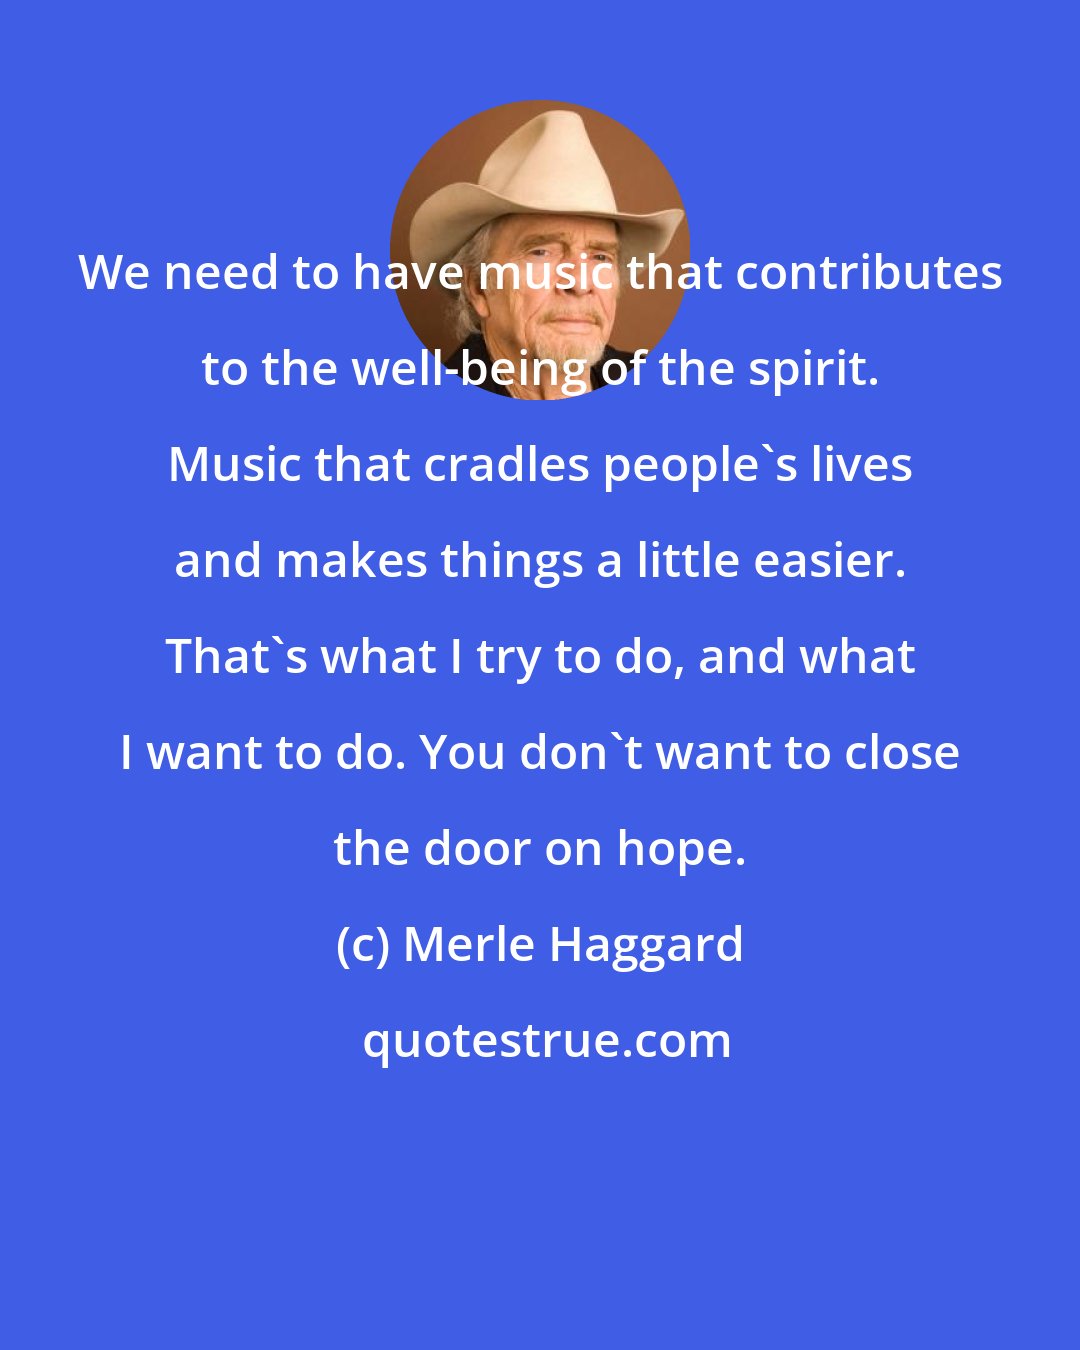 Merle Haggard: We need to have music that contributes to the well-being of the spirit. Music that cradles people's lives and makes things a little easier. That's what I try to do, and what I want to do. You don't want to close the door on hope.